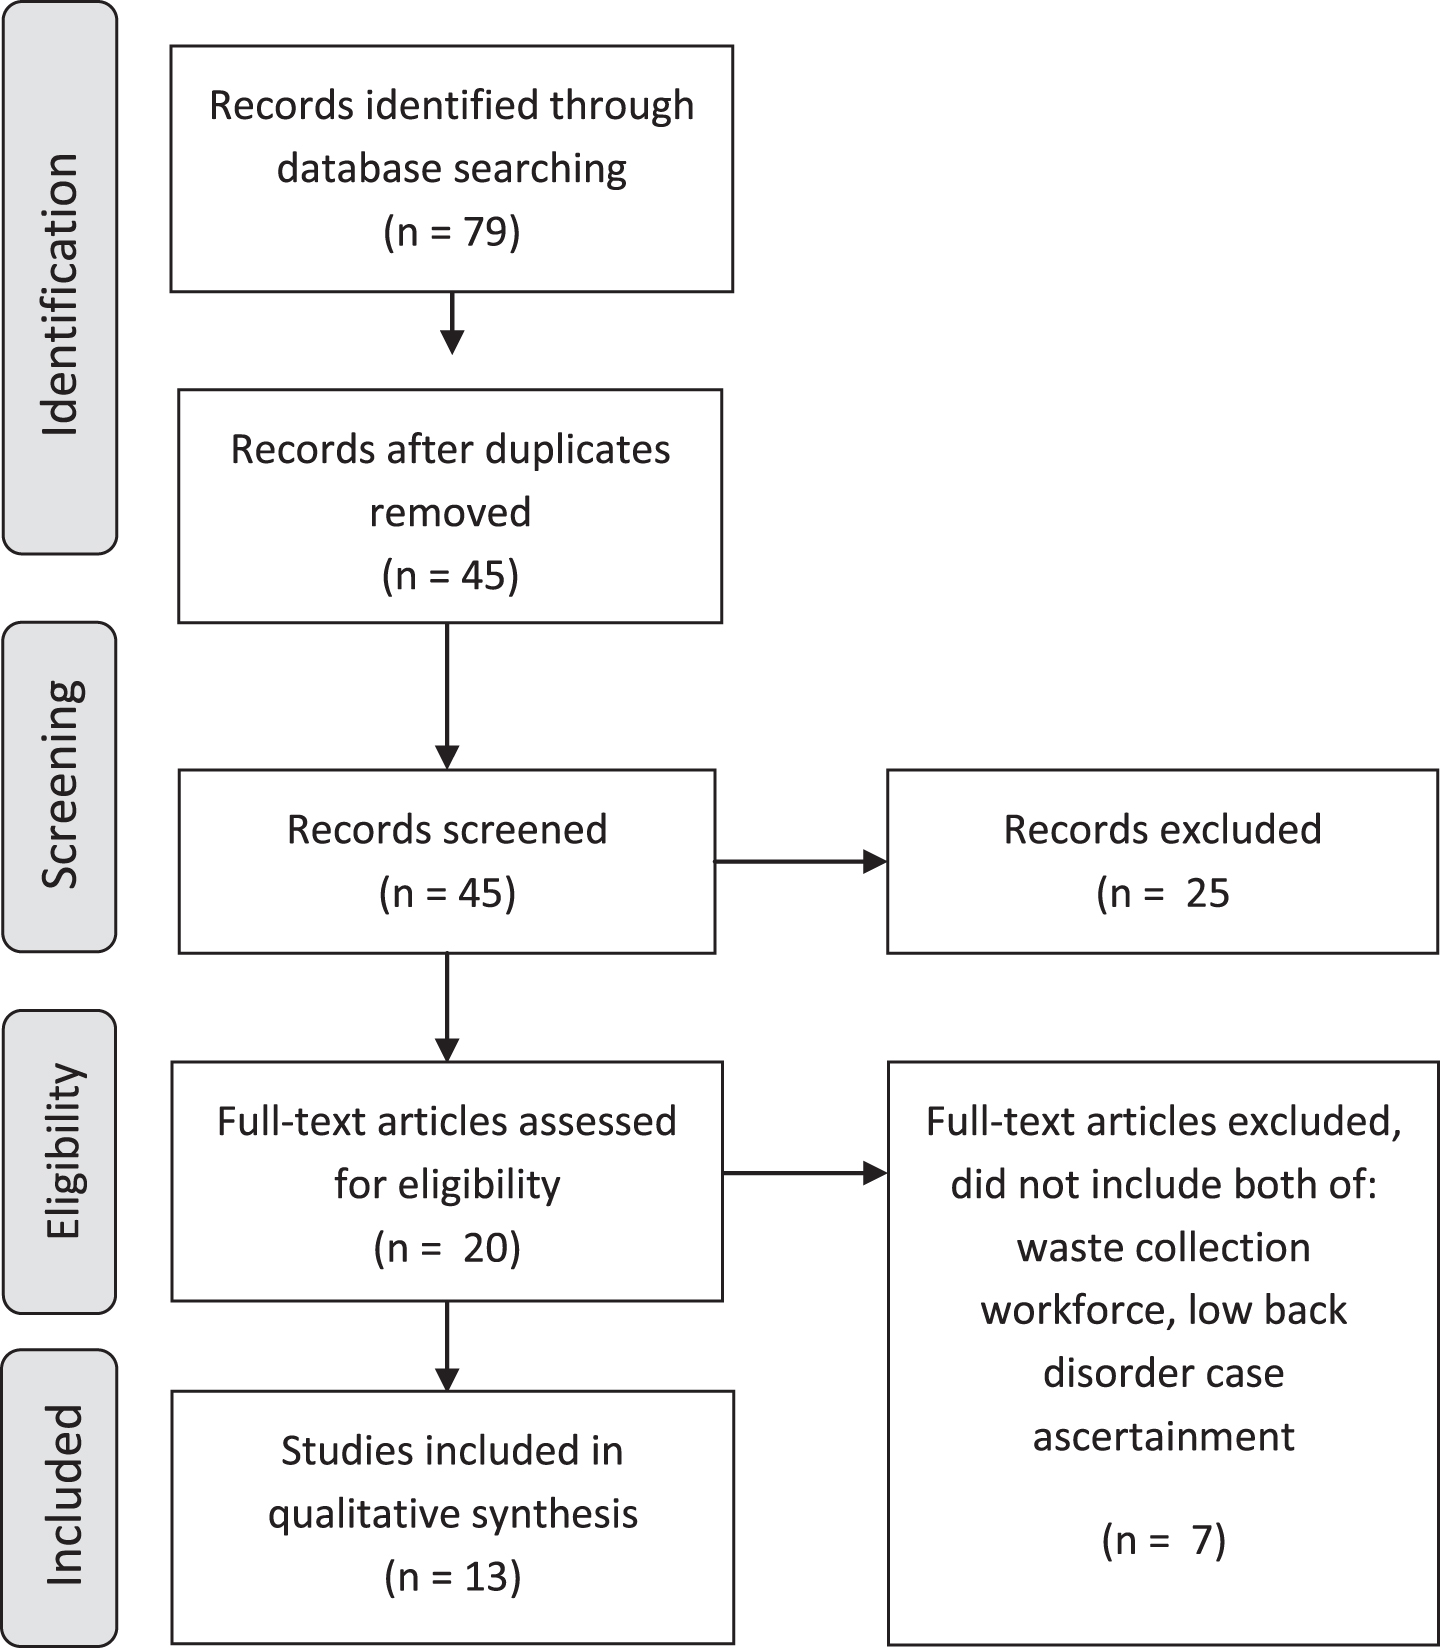 PRISMA diagram outlining search and screening results for the literature review of low back disorder among waste collection workers.